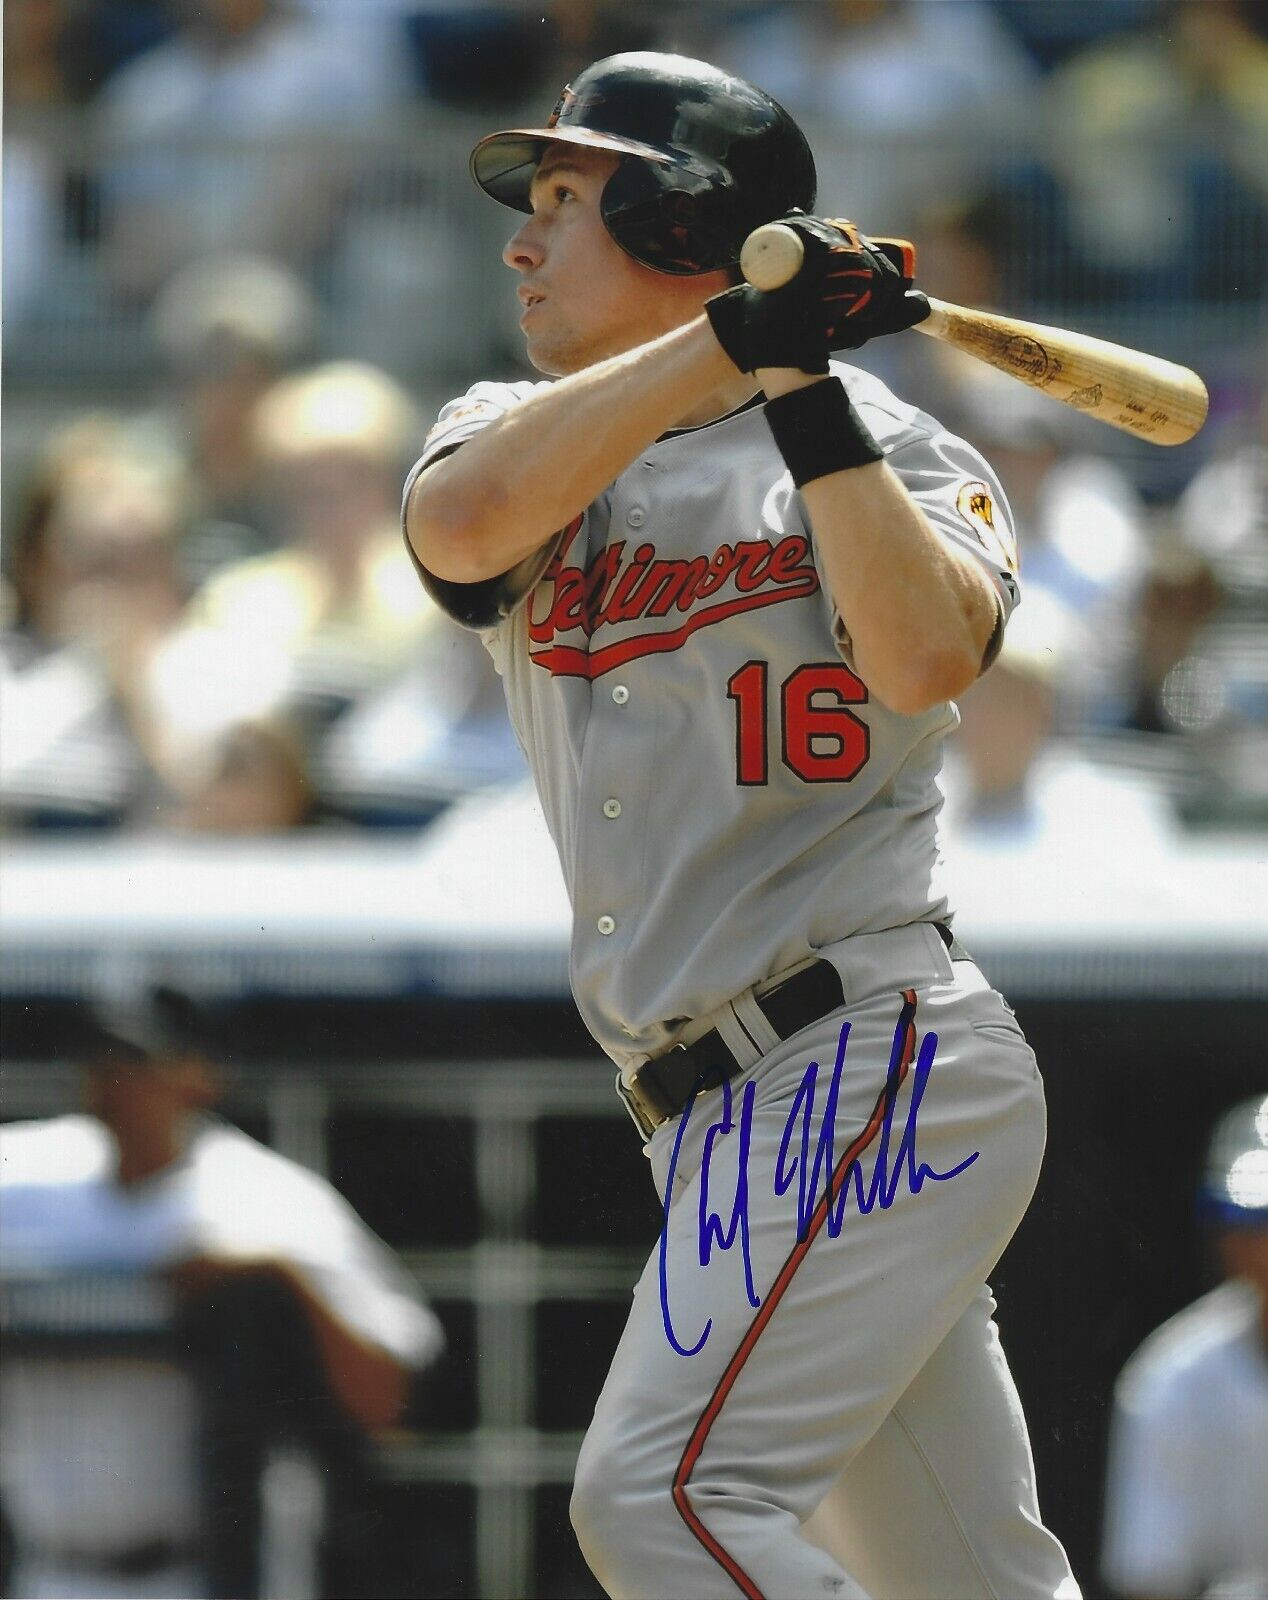 Signed 8X10 CHAD MOELLER Baltimore Orioles Autographed Photo Poster painting - COA